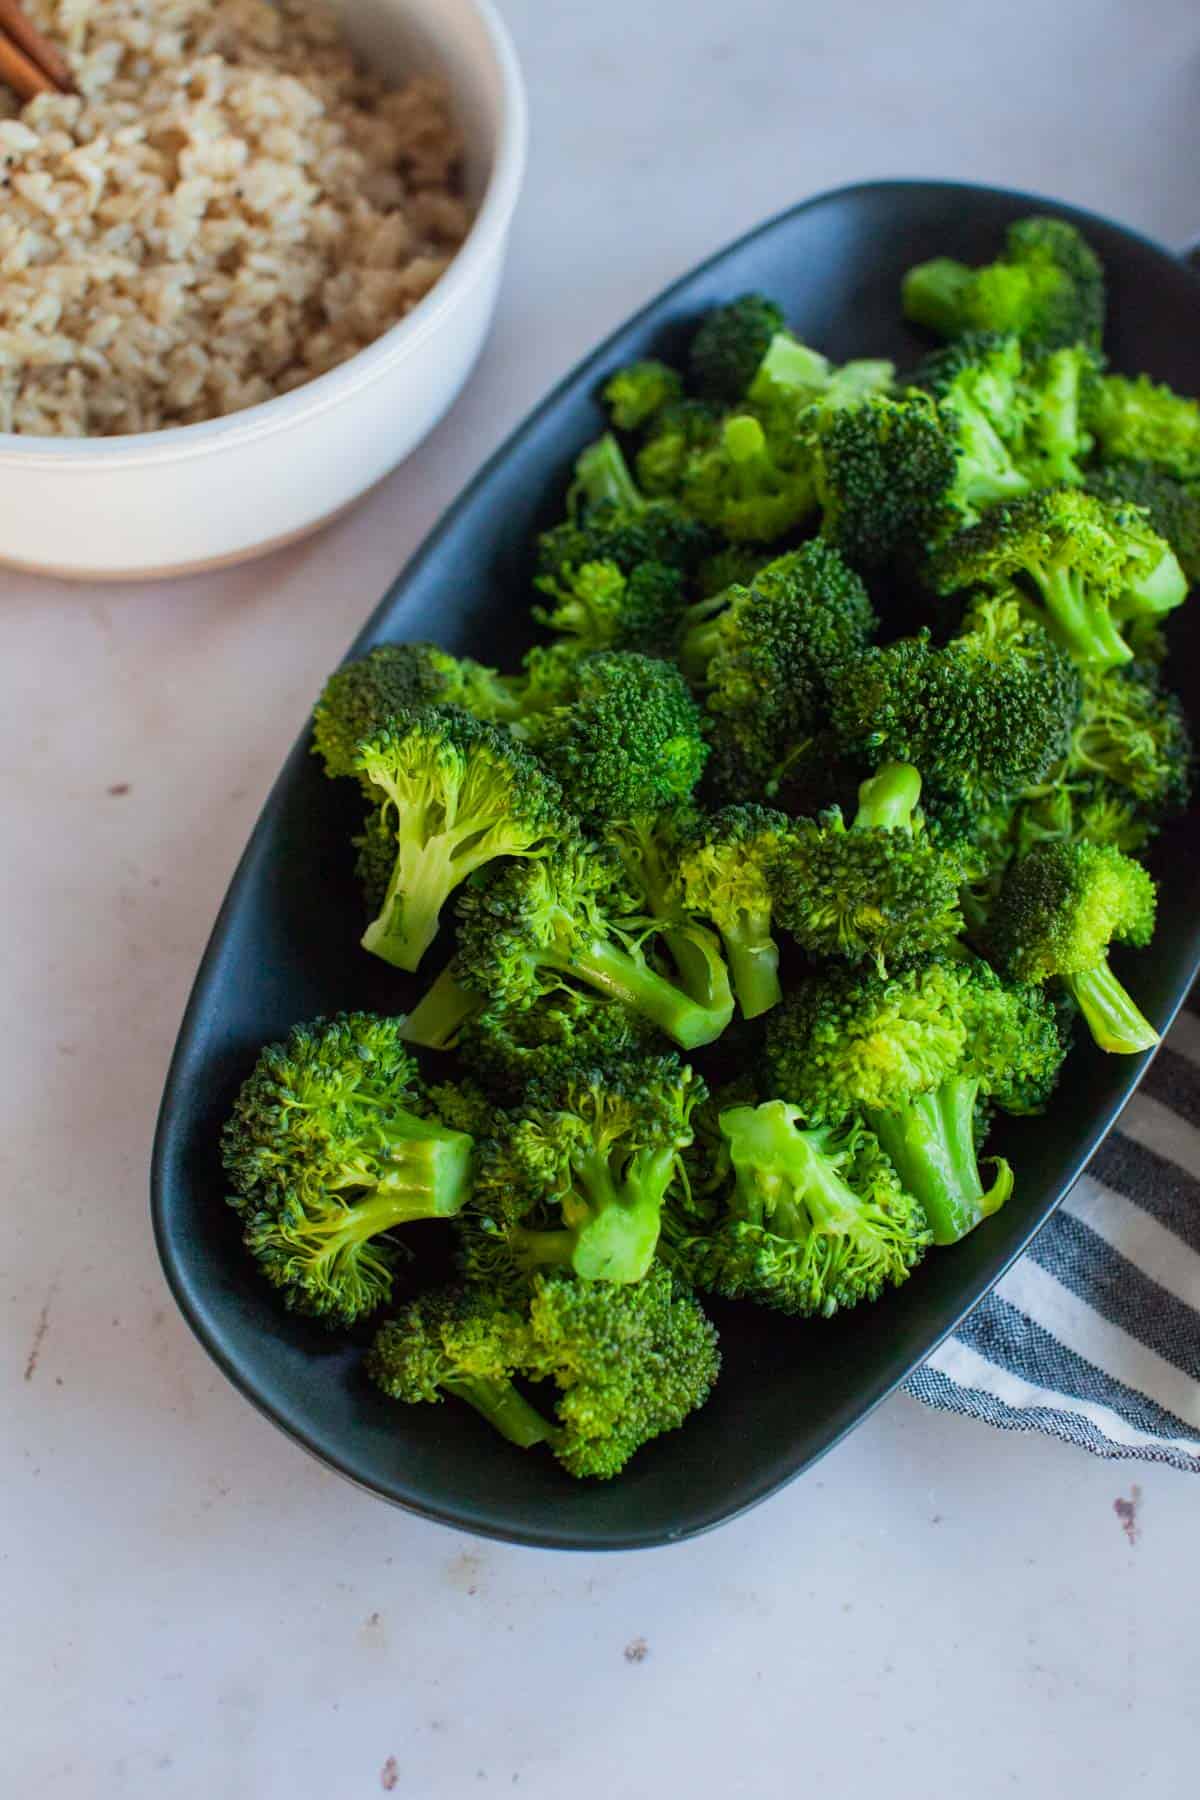 Steamed broccoli in a curved rectangular serving dish.